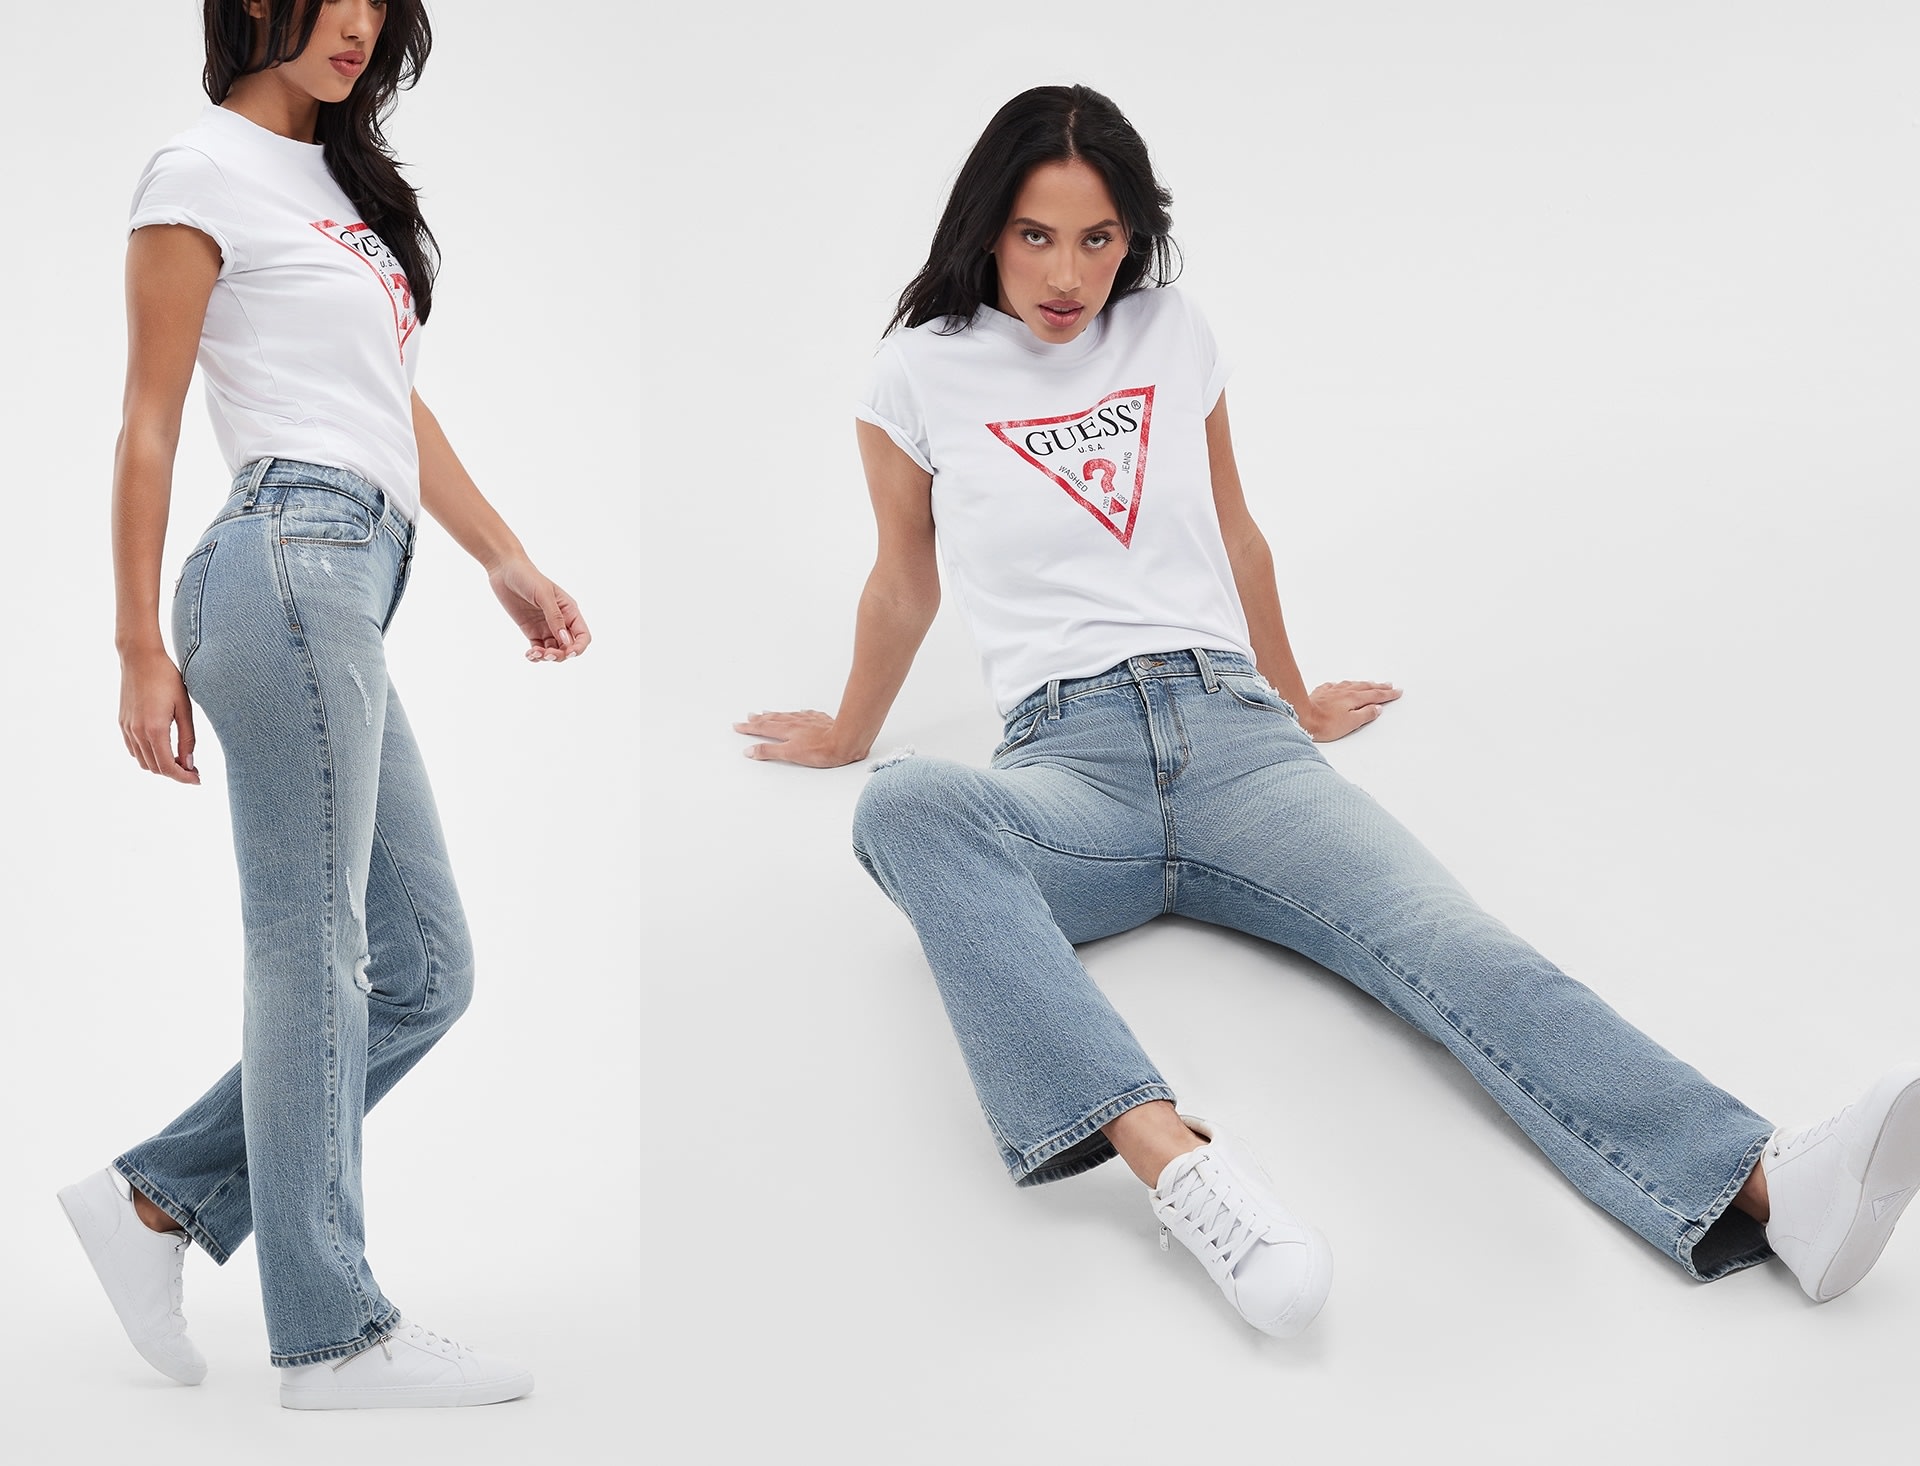 Womens' Jeans Style & Fit Guide